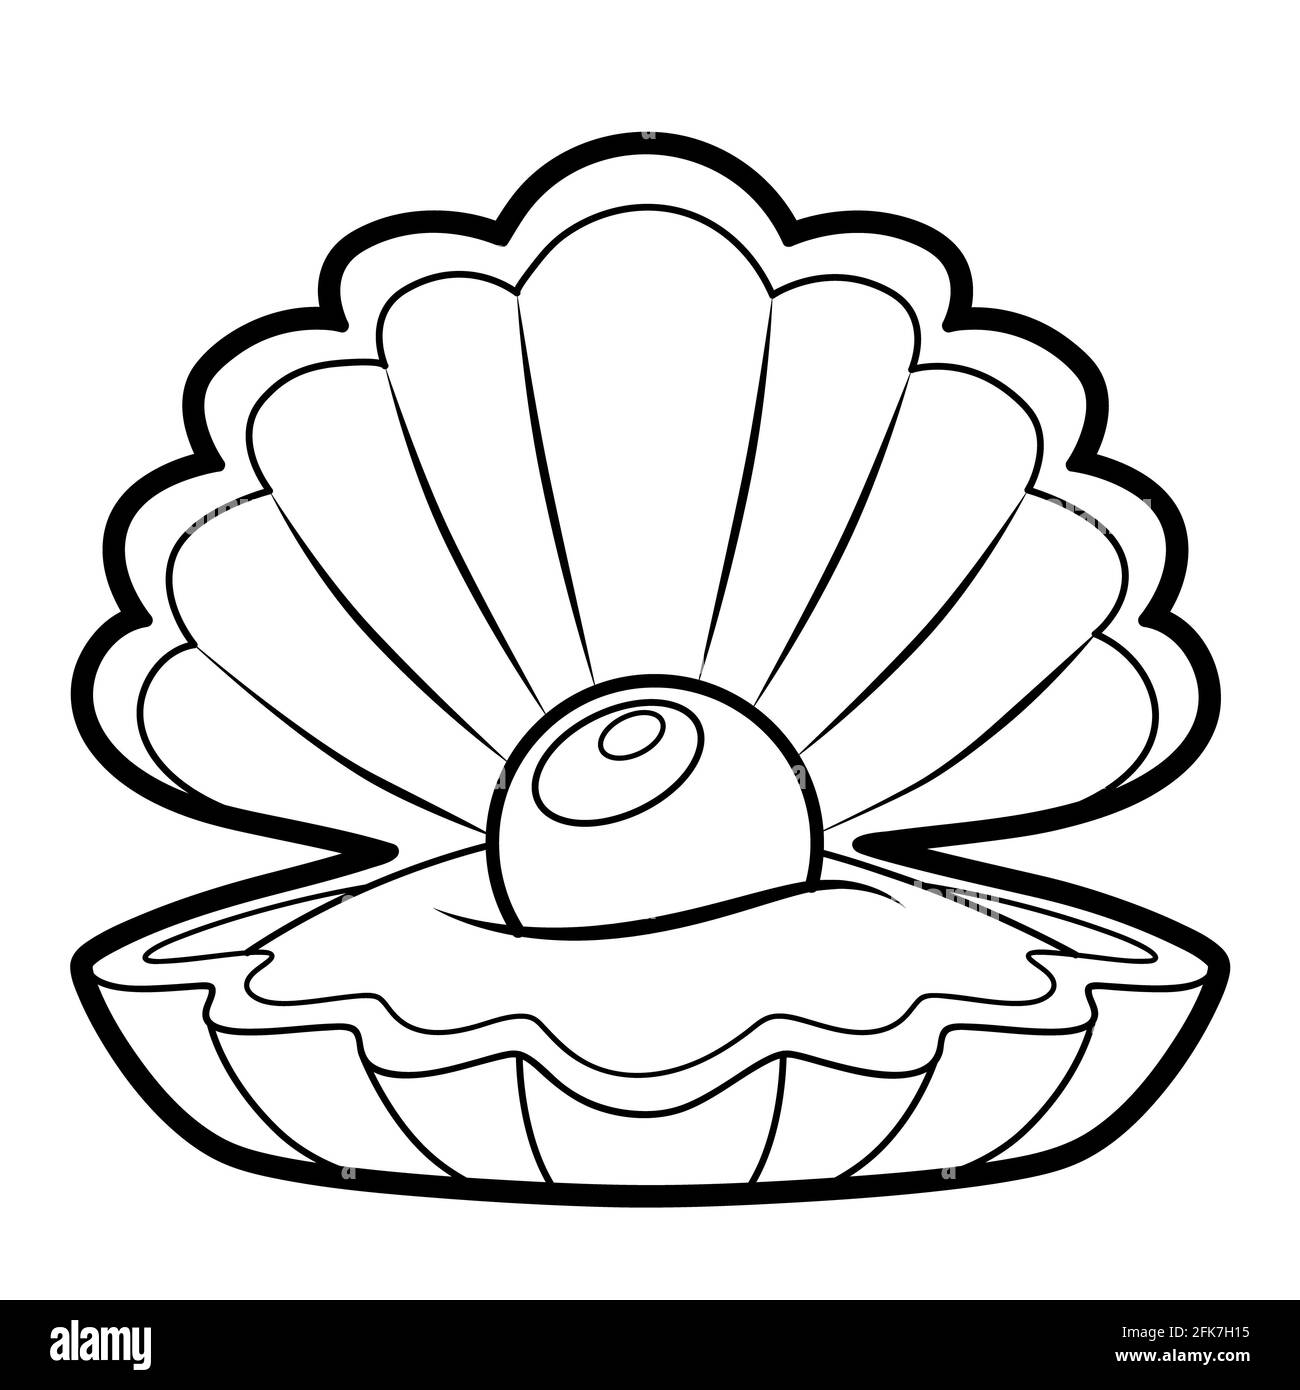 Pearl shell cartoon Black and White Stock Photos & Images - Alamy